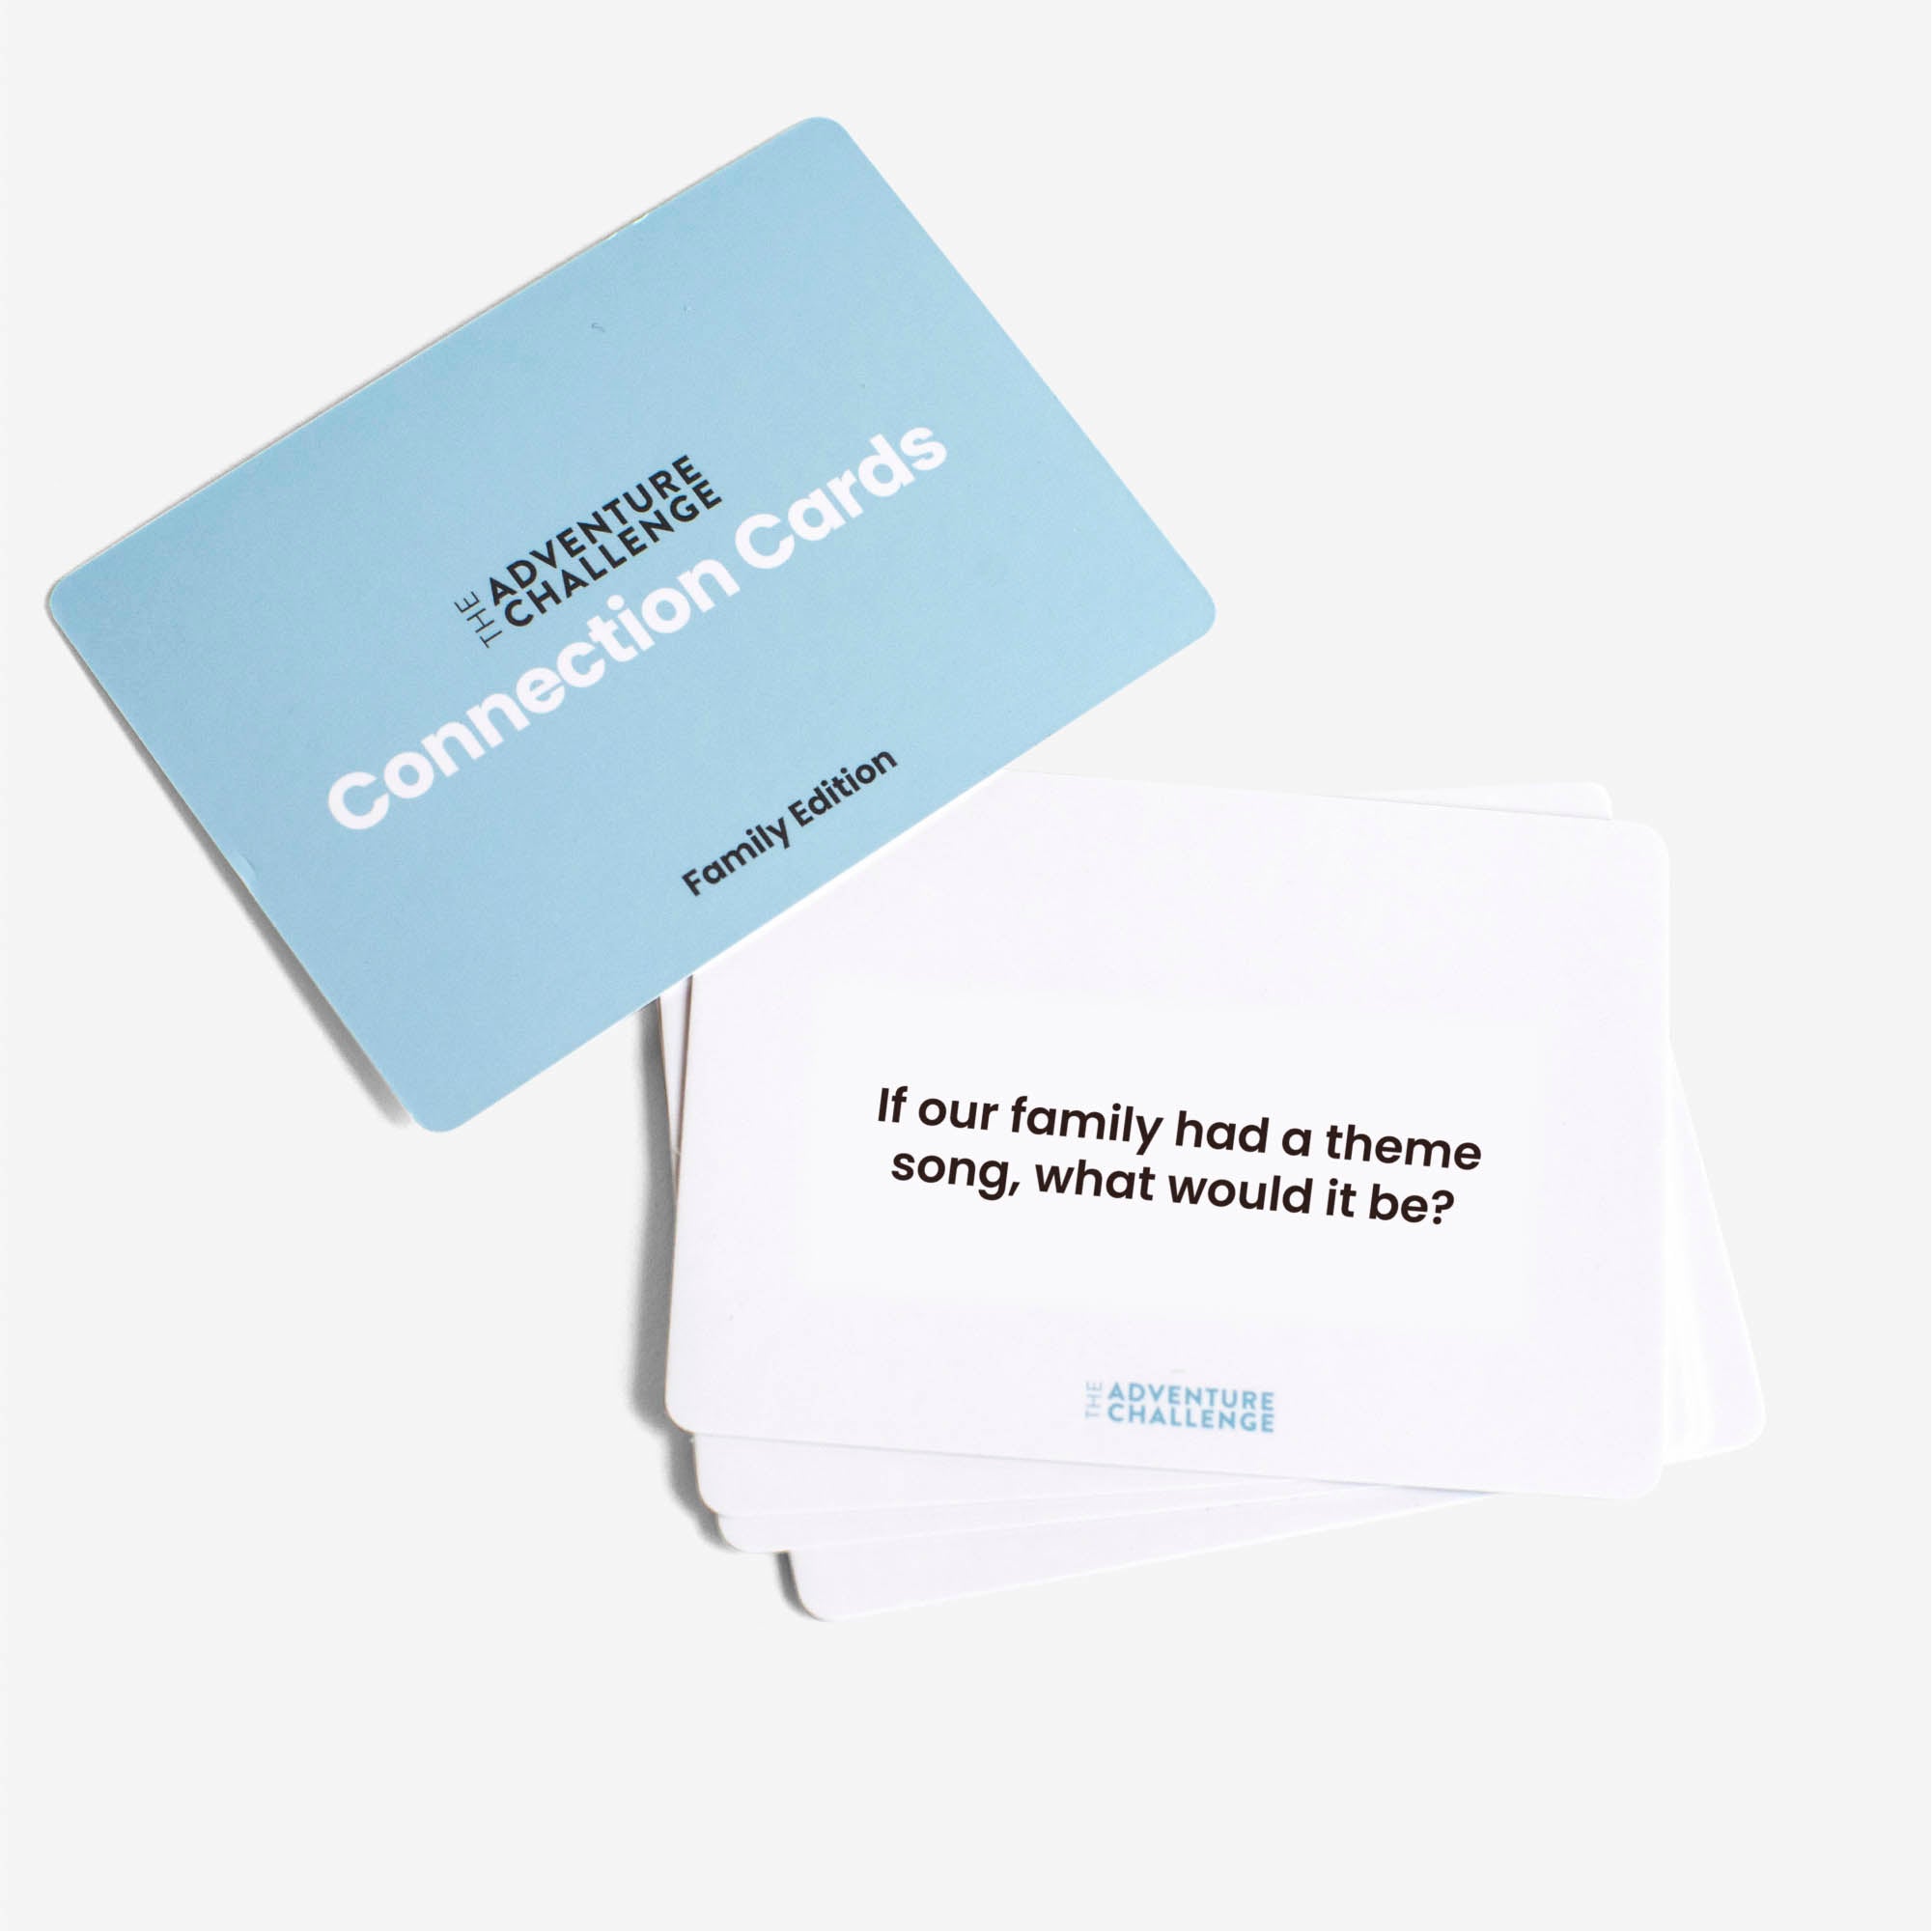 Family Edition and Family Connection Cards Bundle